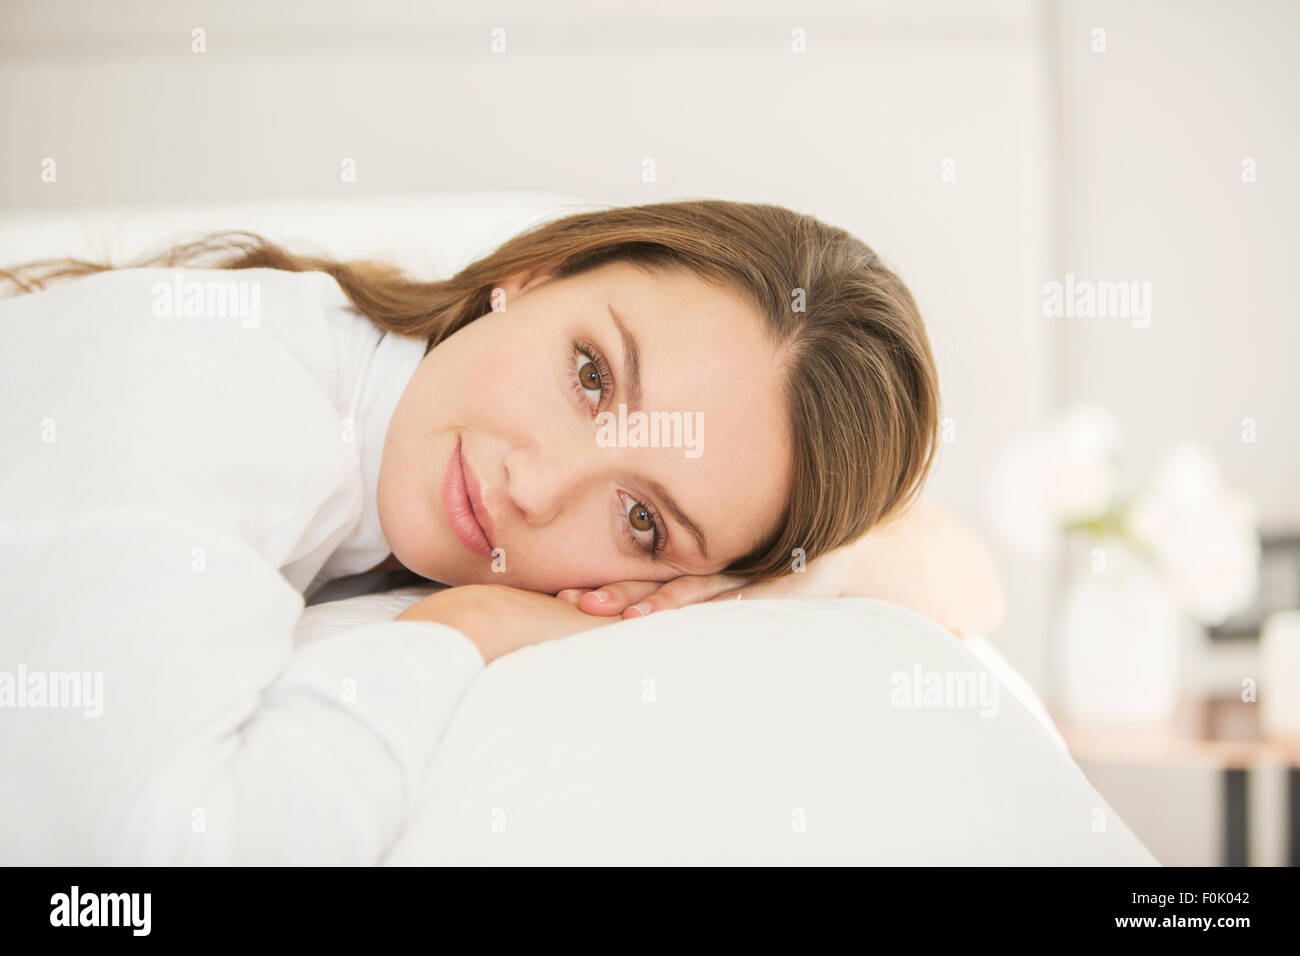 Portrait serene woman laying on bed Stock Photo